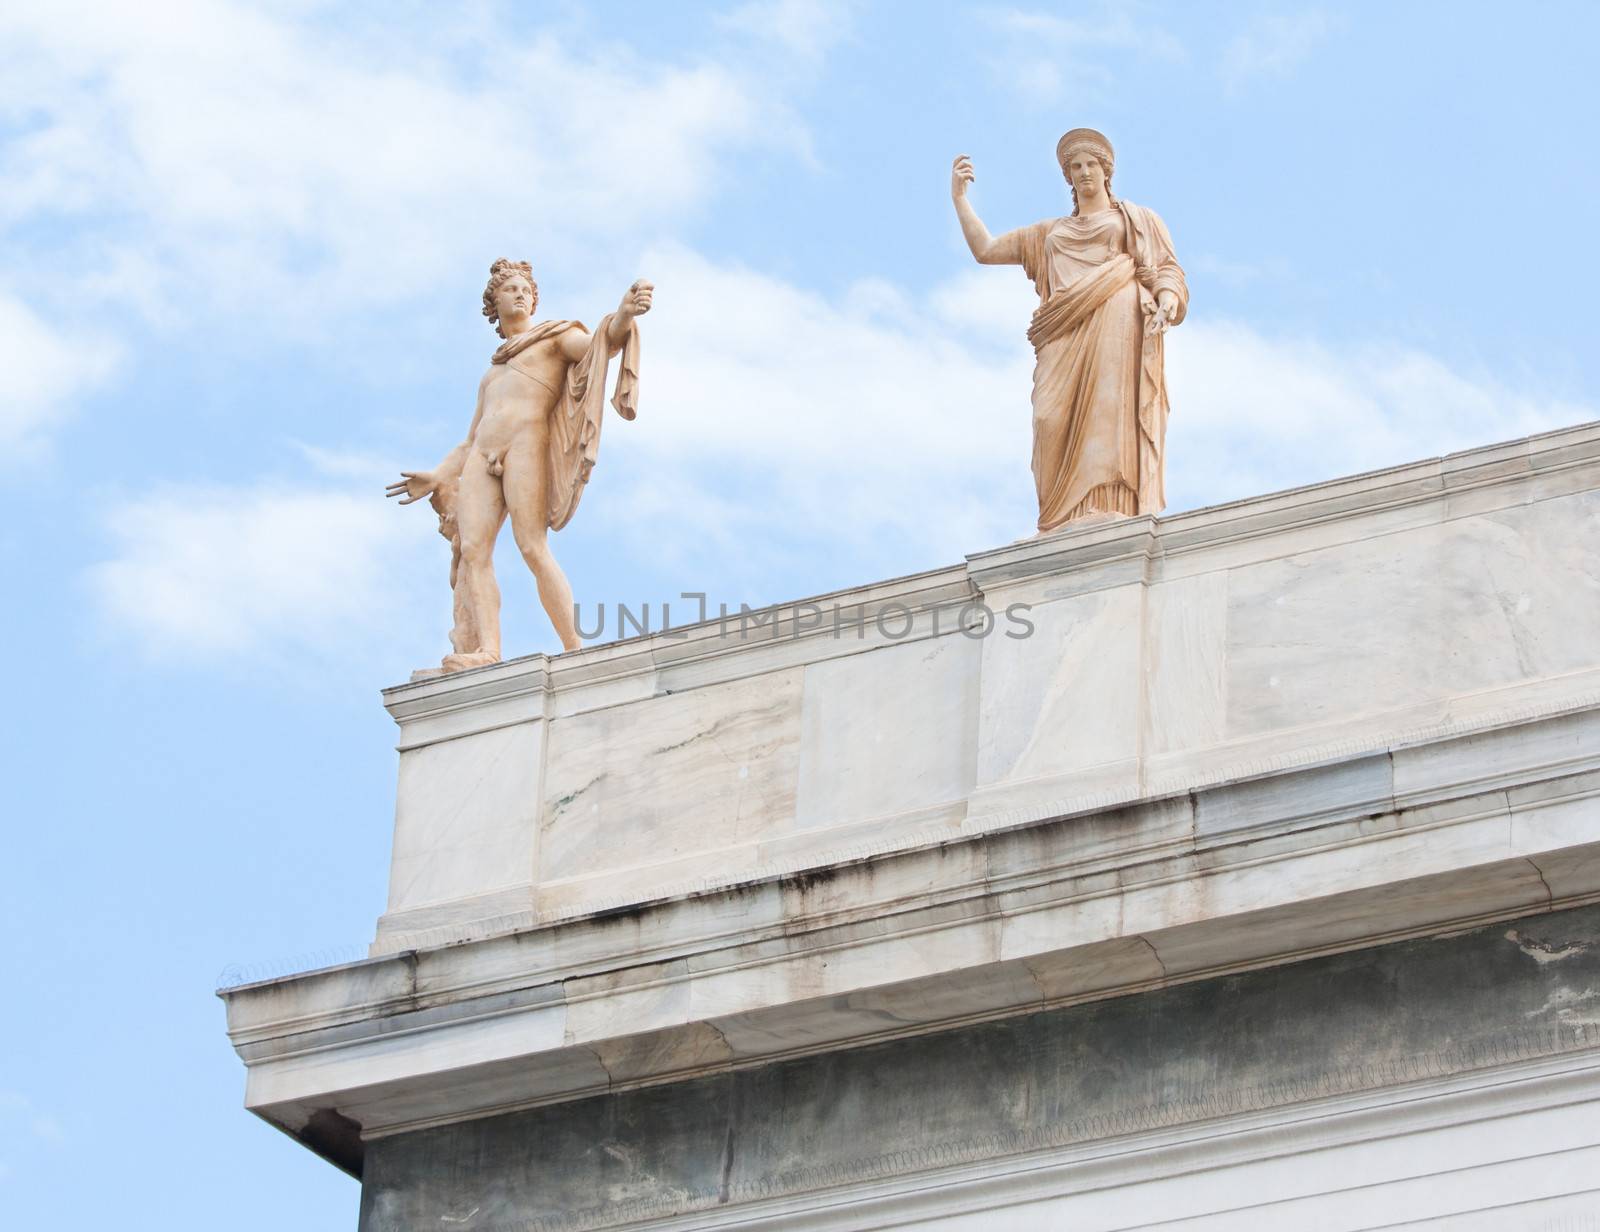 Sculptures of Apollo and Hera on the roof-top above the entrance of the National Archaeological Museum of Athens in Greece.